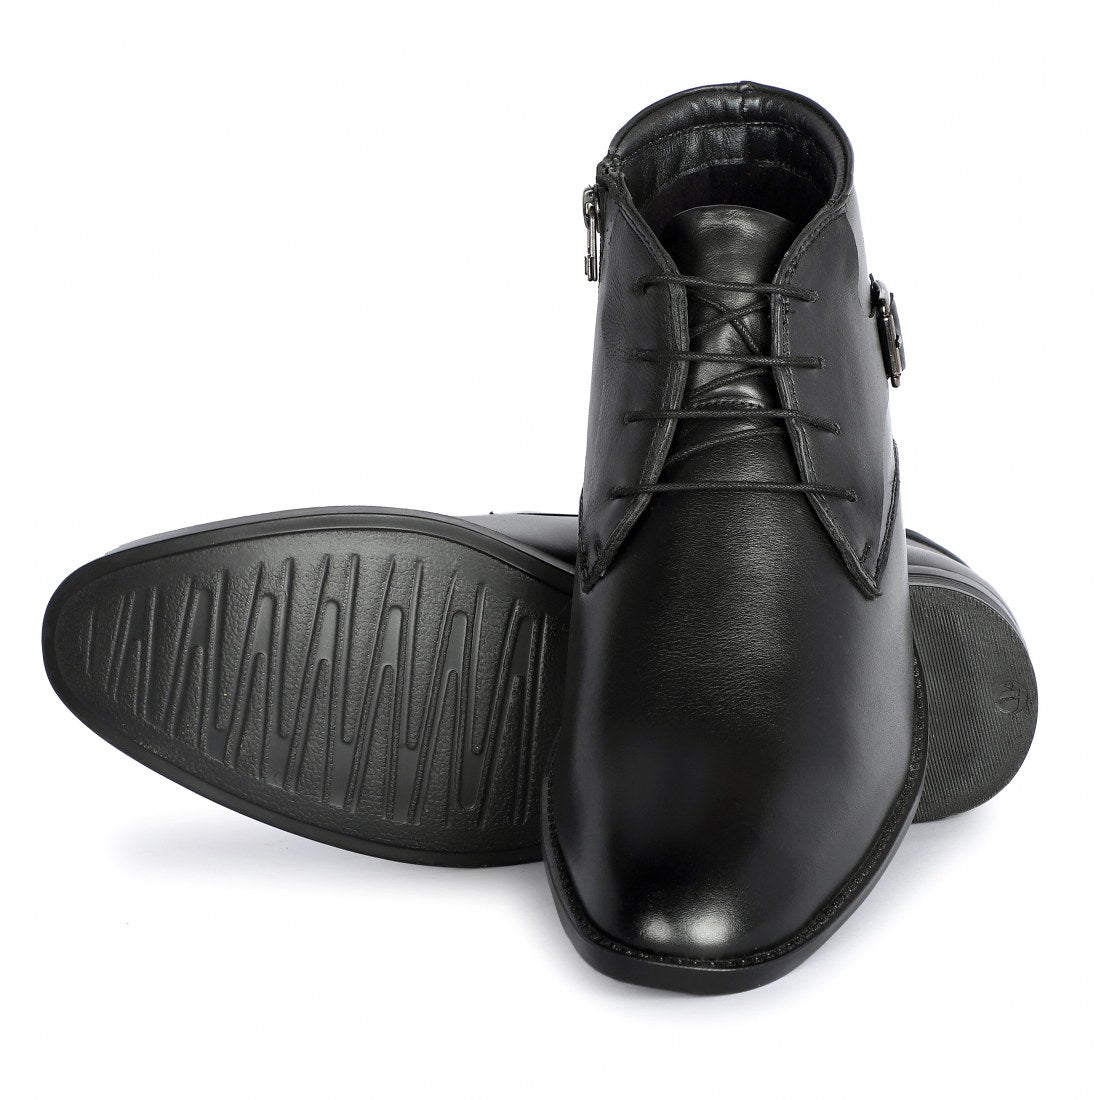 AMAZONA-76 MEN LEATHER BLACK FORMAL BOOT ANKLE DERBY.